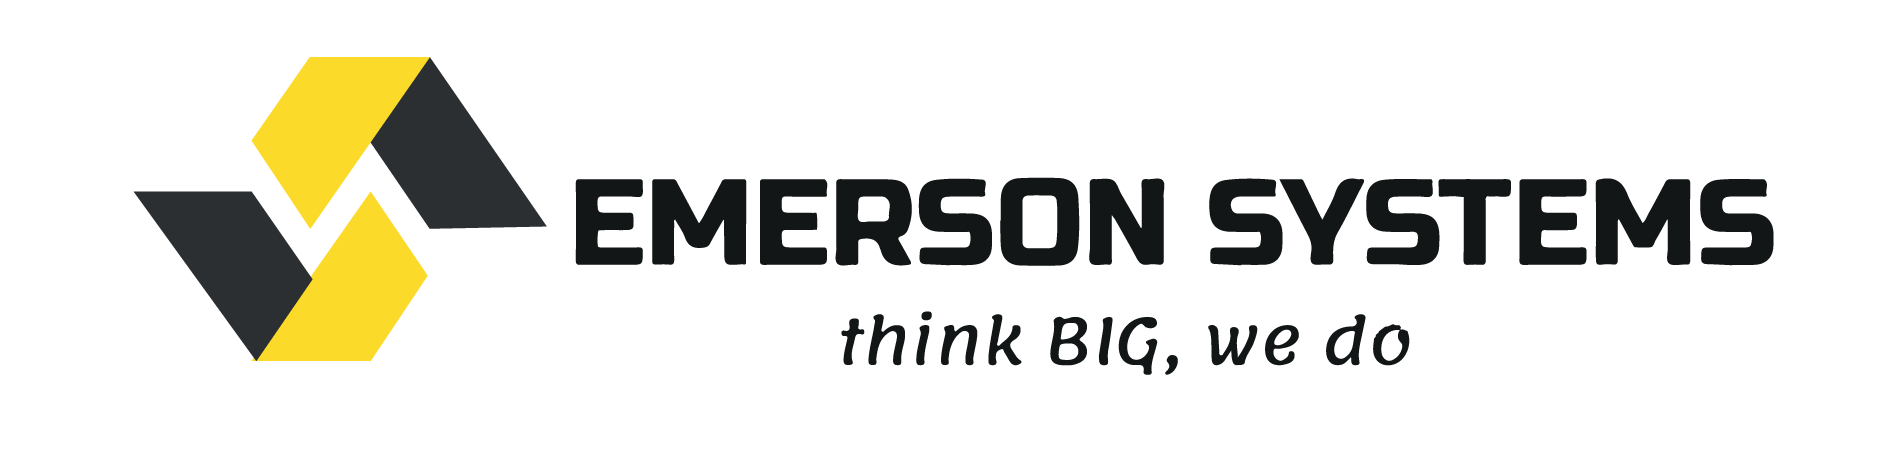 Emerson Systems